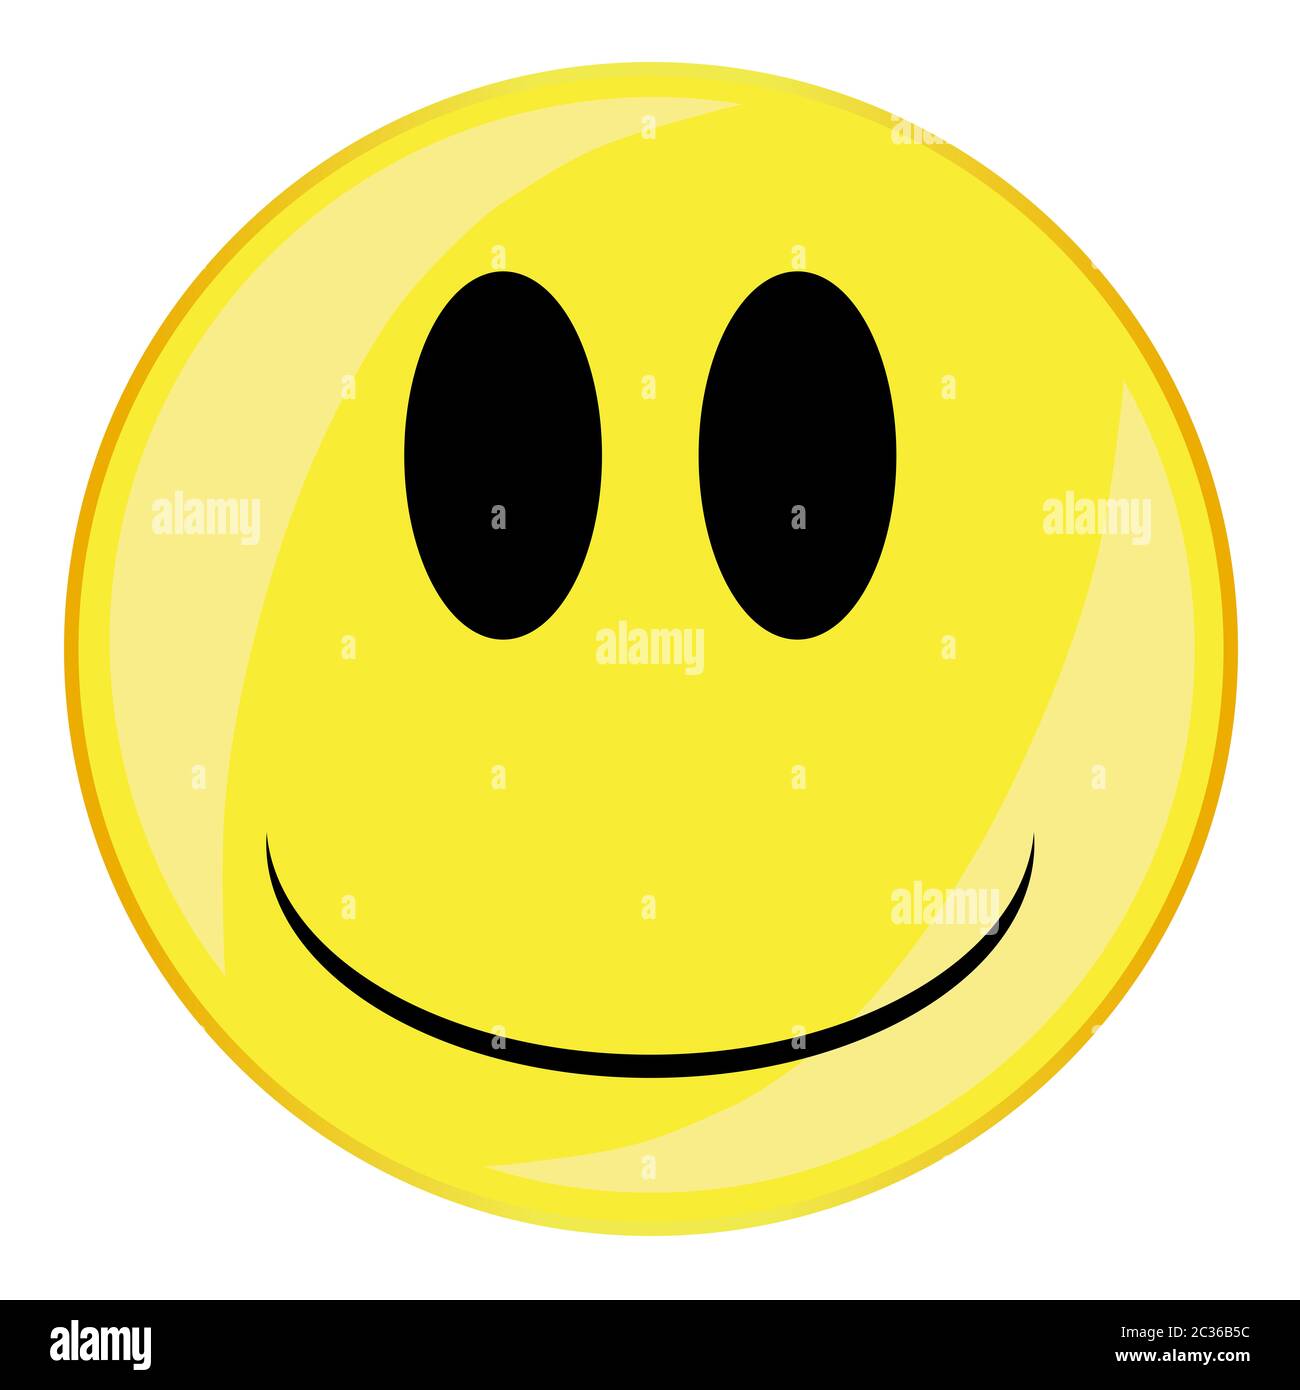 A glum smile face button isolated on a white background Stock Photo